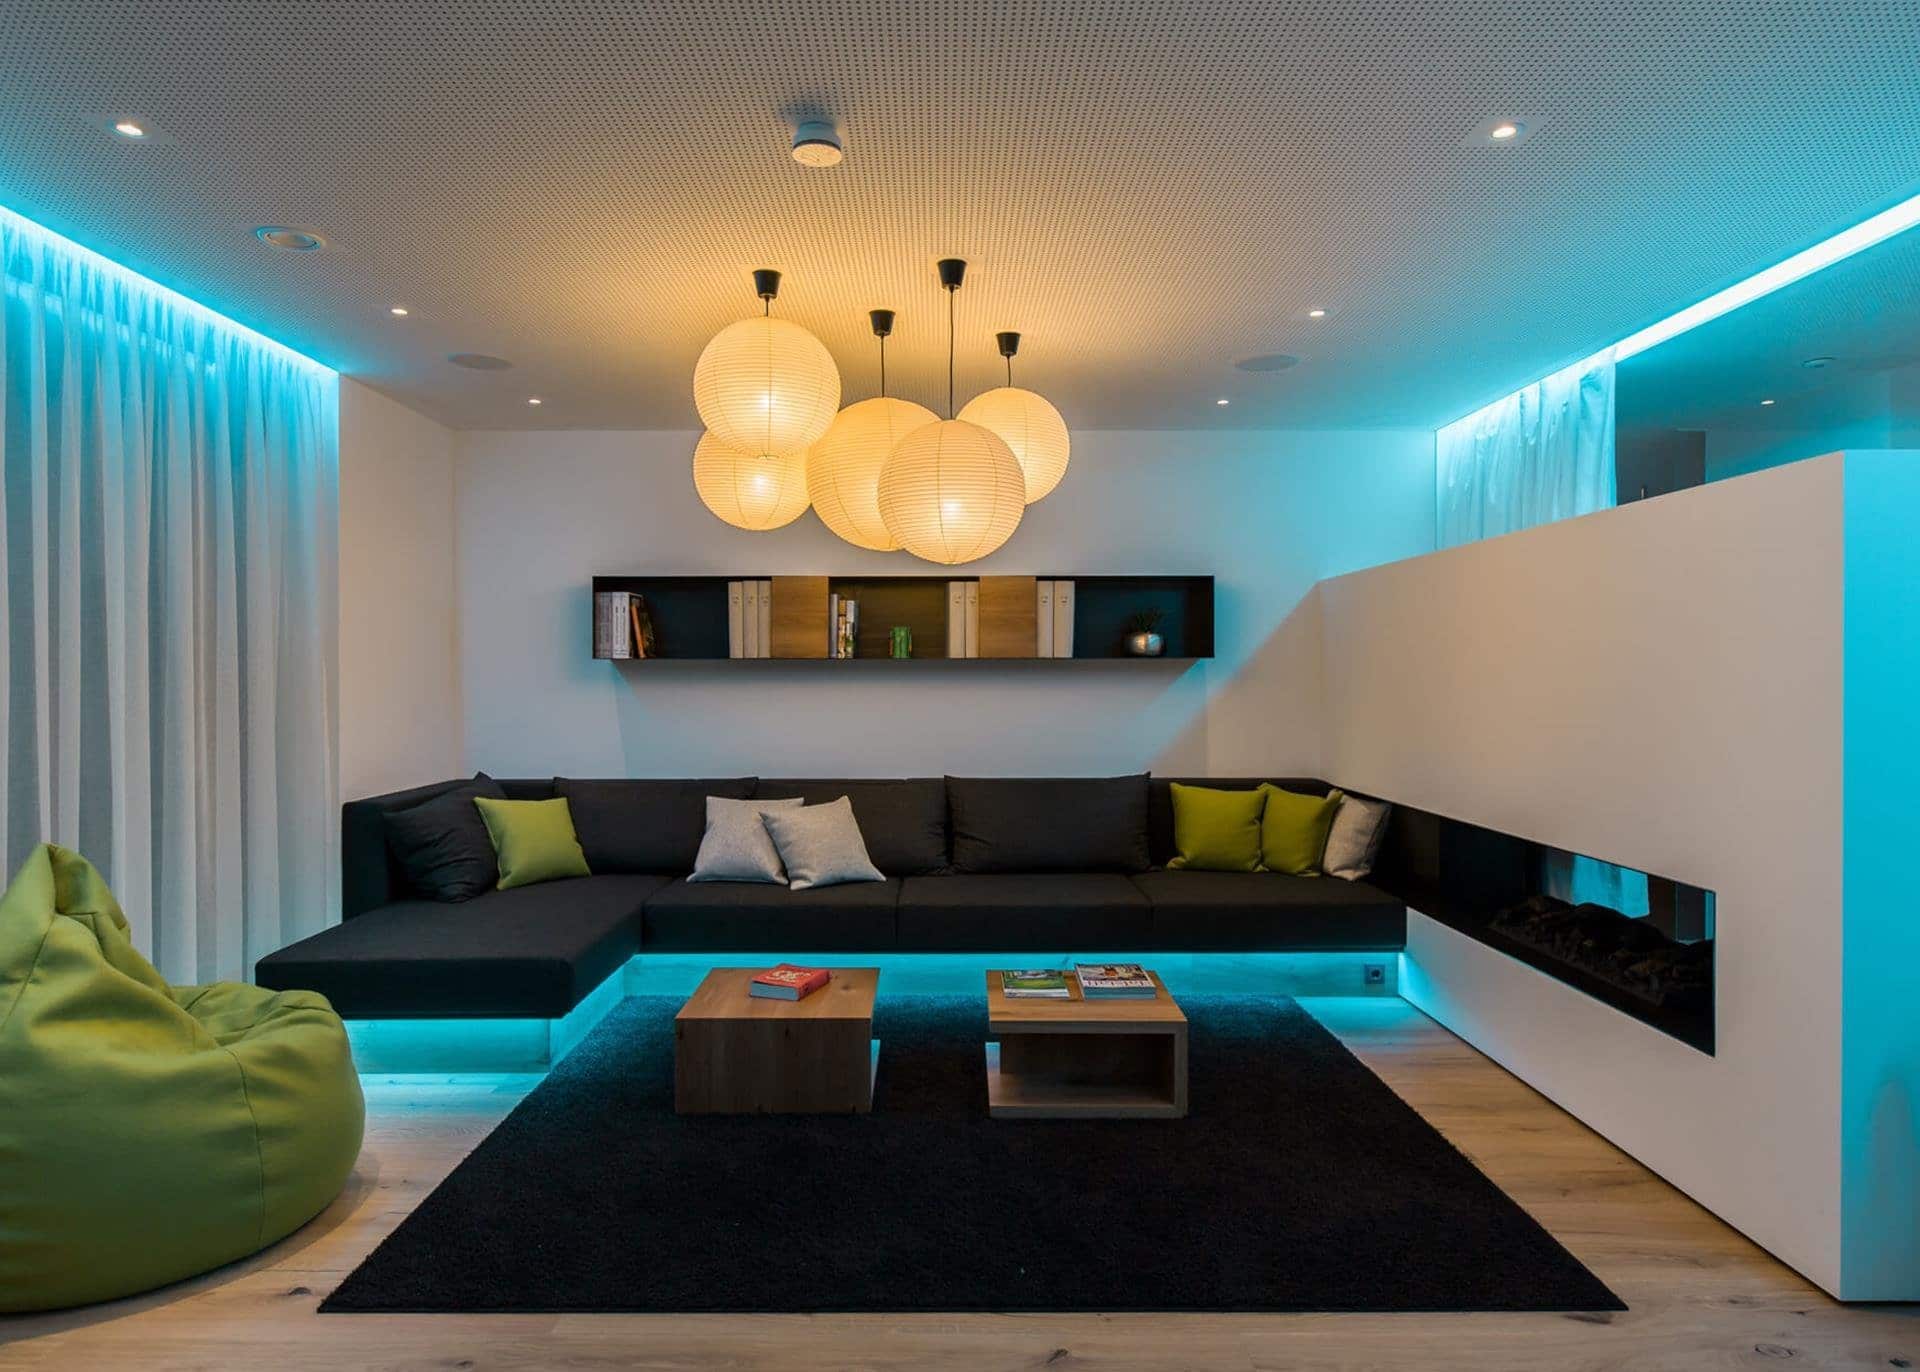 What Is Ambient Lighting In Interior Design